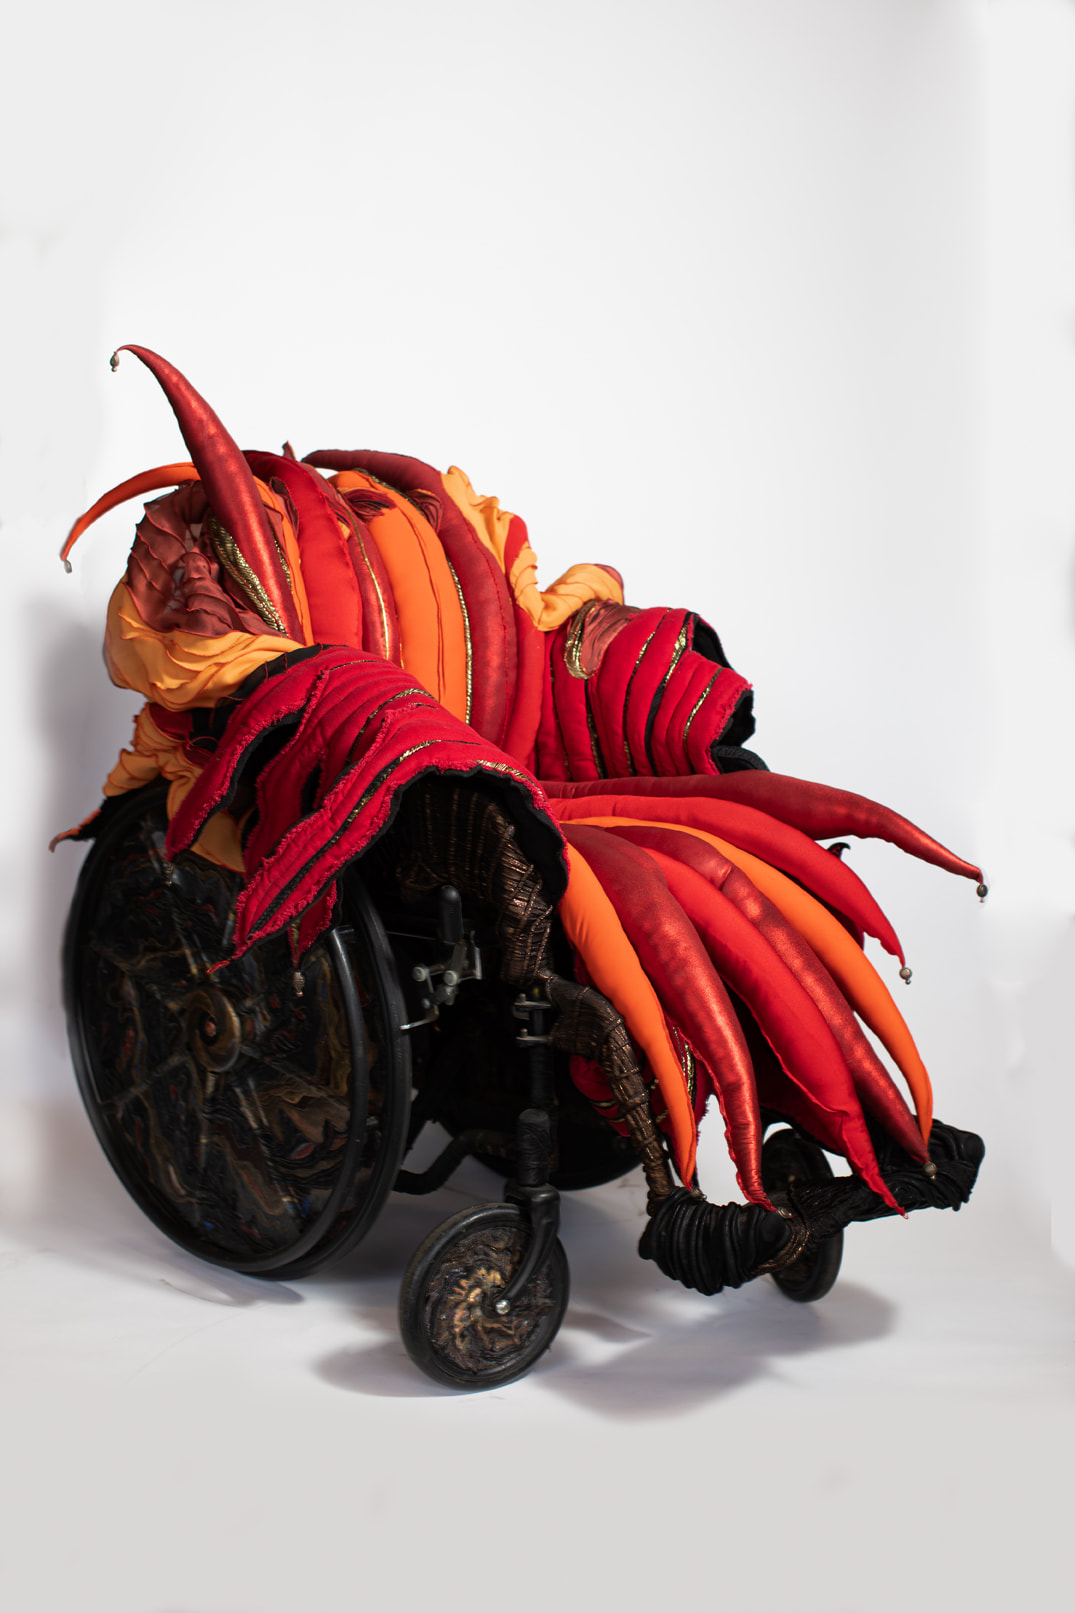 A wheelchair with copper, black, and multicolored swirls on its wheels has a seat cover covered in red, orange, and gold padded spikes tipped with brass beads.